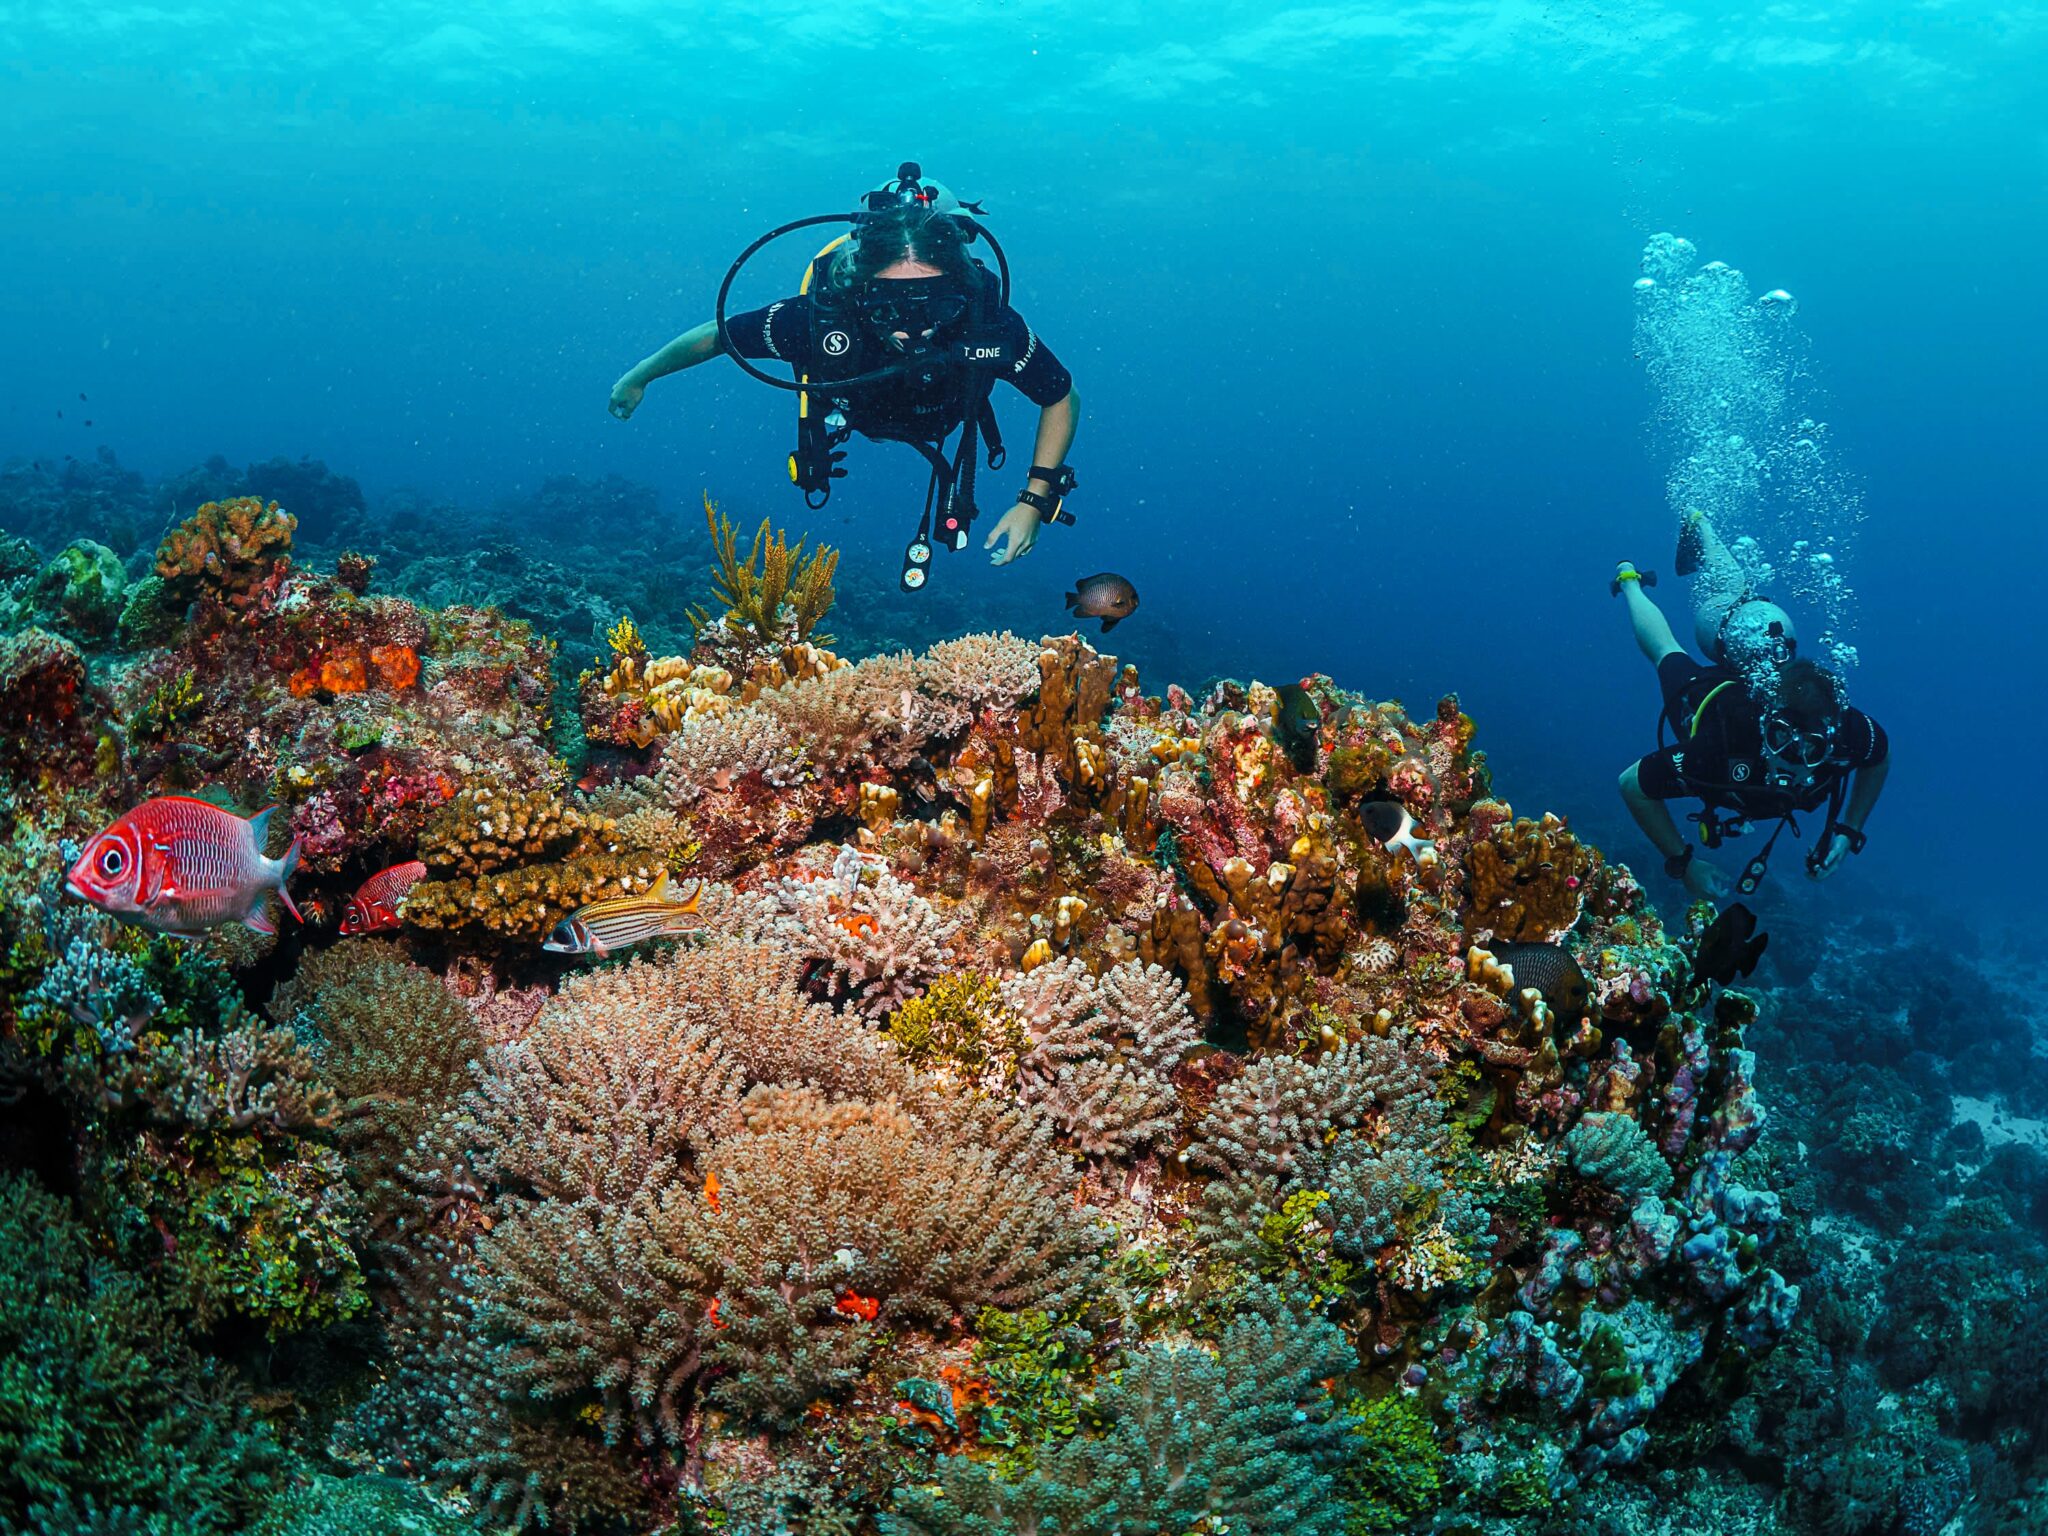 Mary Hannah and her husband explore a coral reef in Tanzania while scuba diving